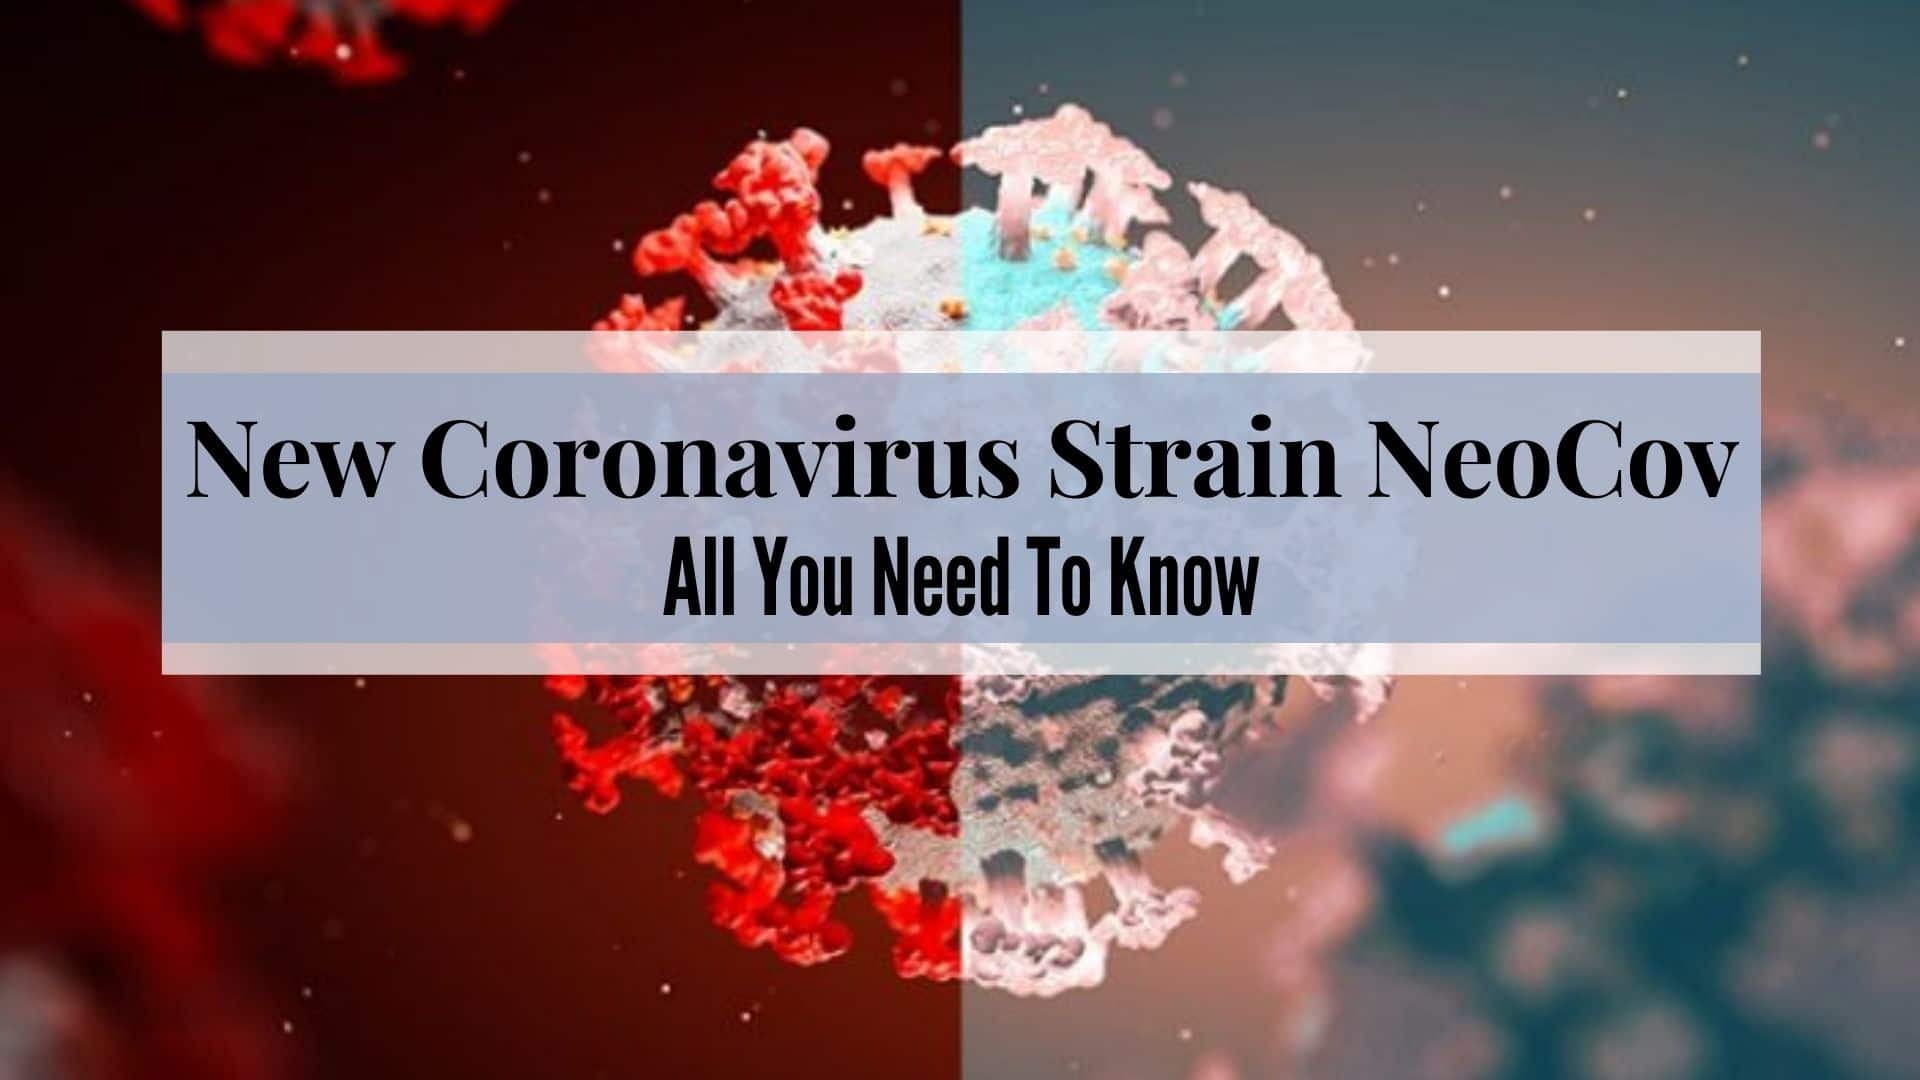 New Coronavirus Strain NeoCov: How Dangerous Is It, What Are The New Symptoms? All You Need To Know